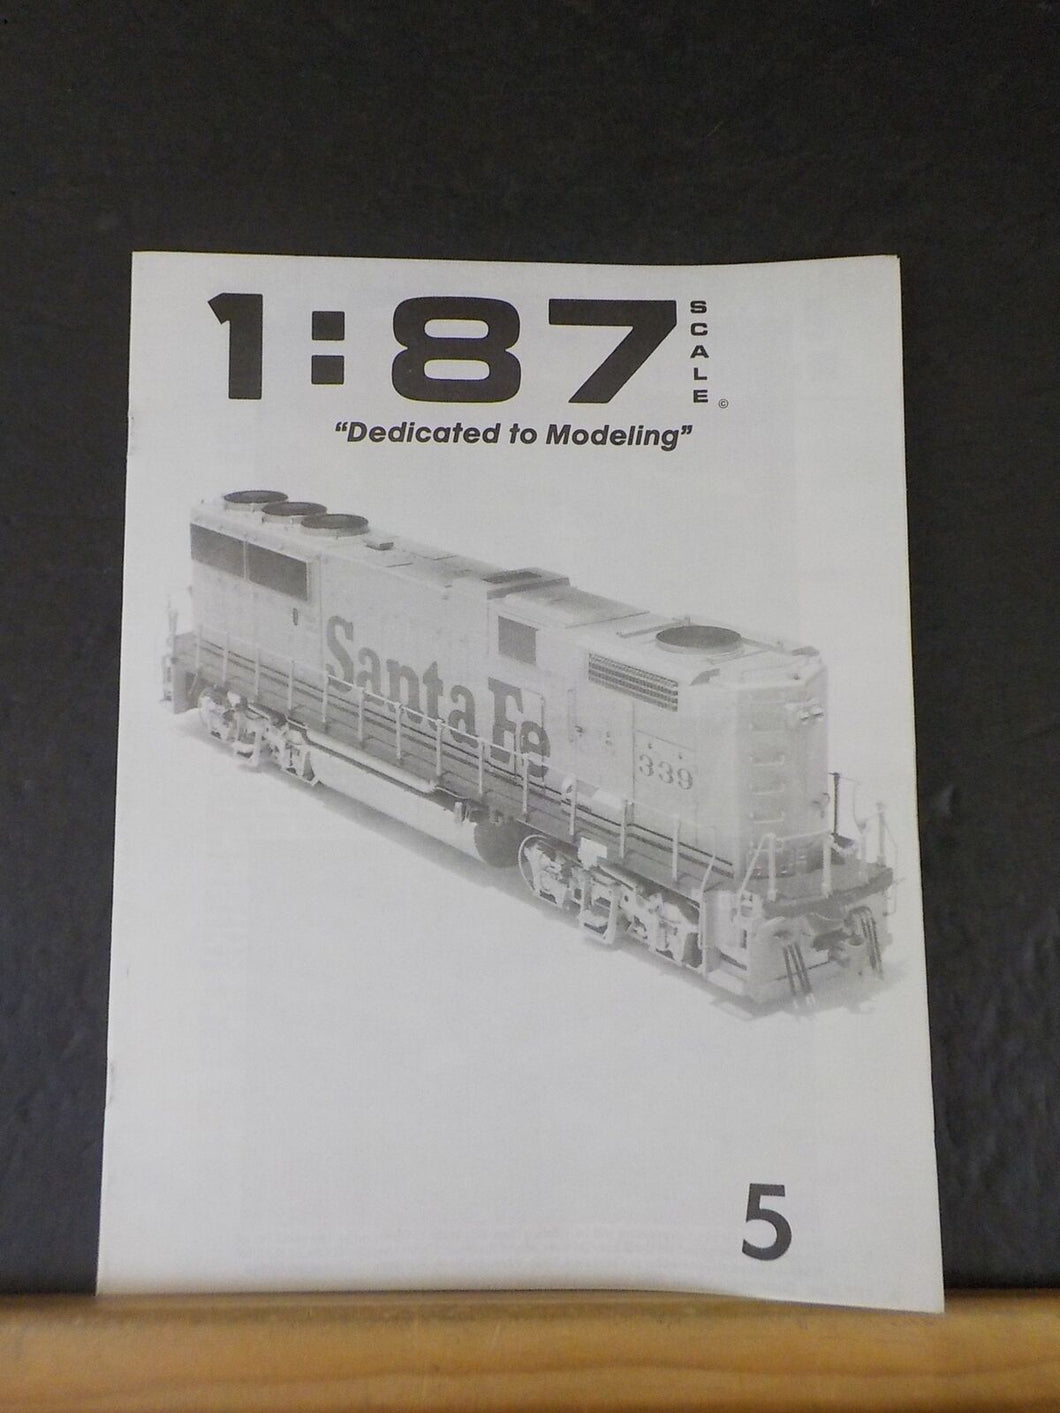 1:87 Scale Magazine Issue #5 Dedicated to Modeling Sept oct 1992